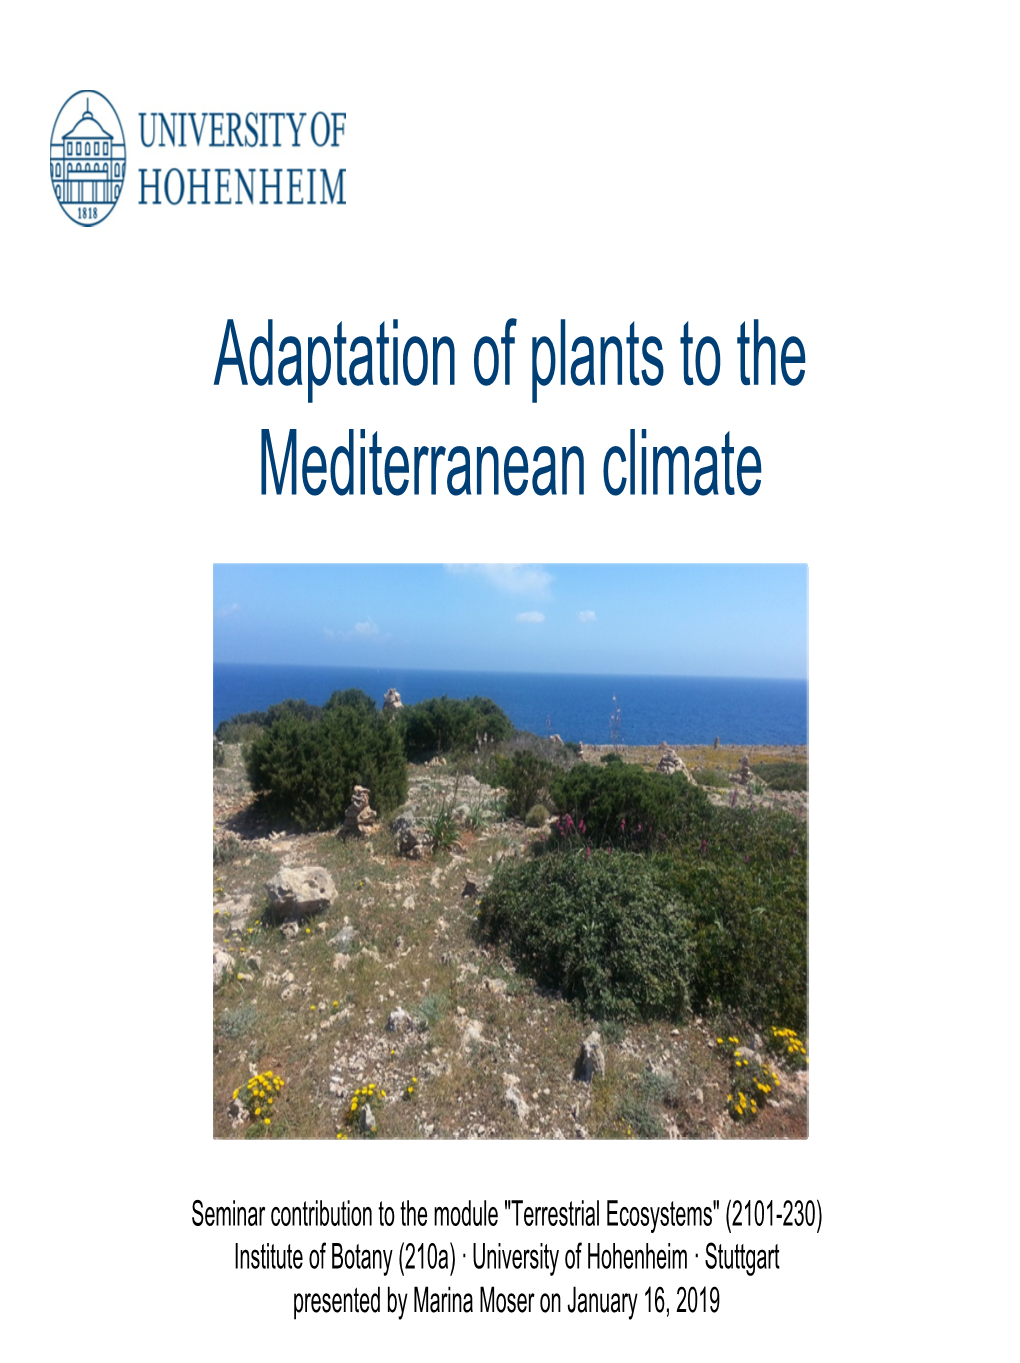 Adaptation of Plants to the Mediterranean Climate